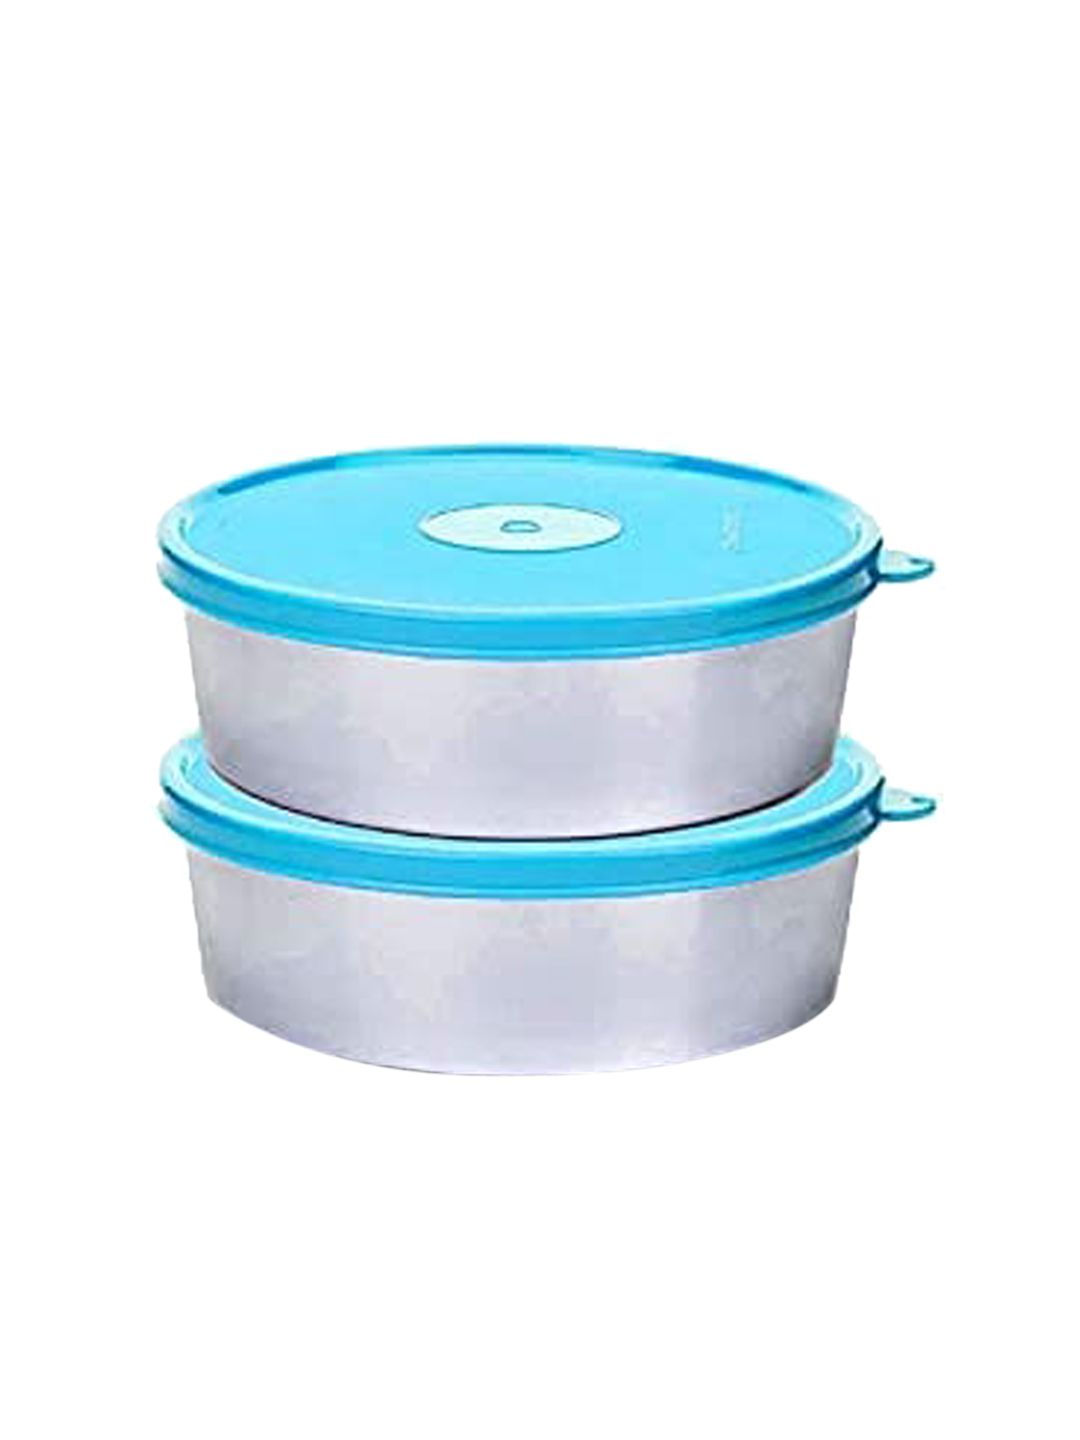 SignoraWare Set Of 2 Blue Solid Food Container With Lid Price in India